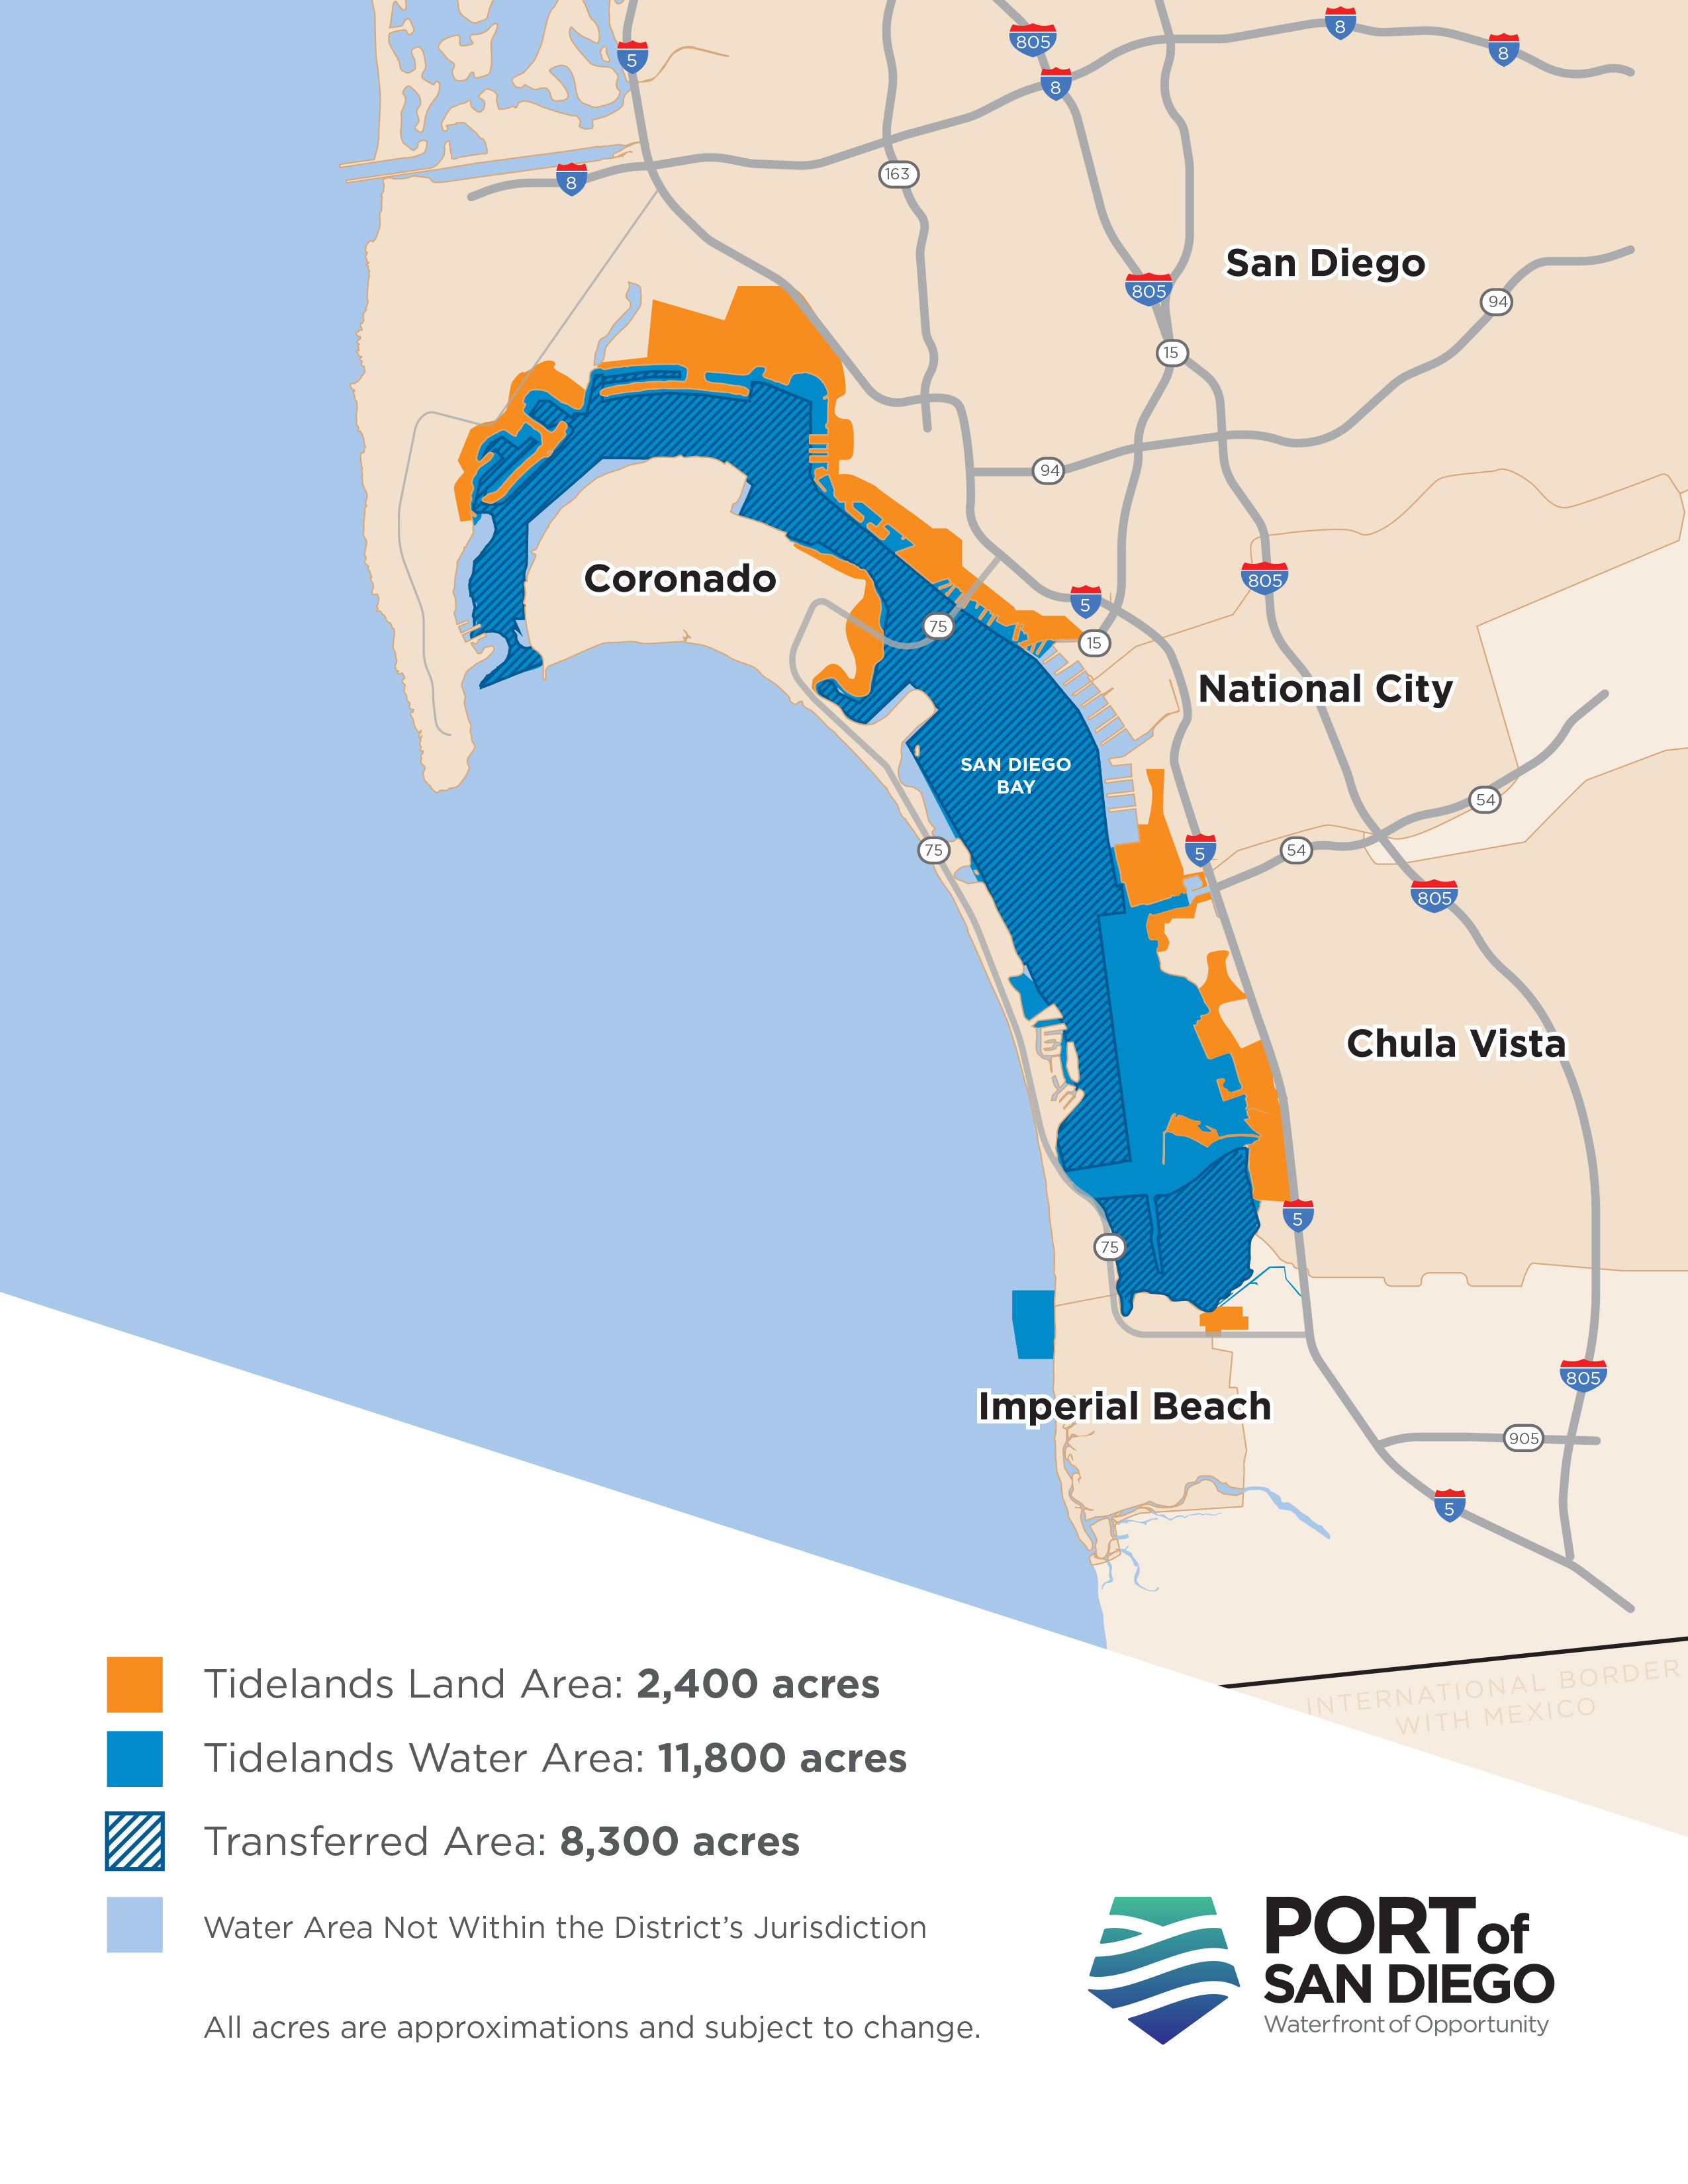 graphic depicting the Port of San Diego's jurisdiction area in and around San Diego Bay 